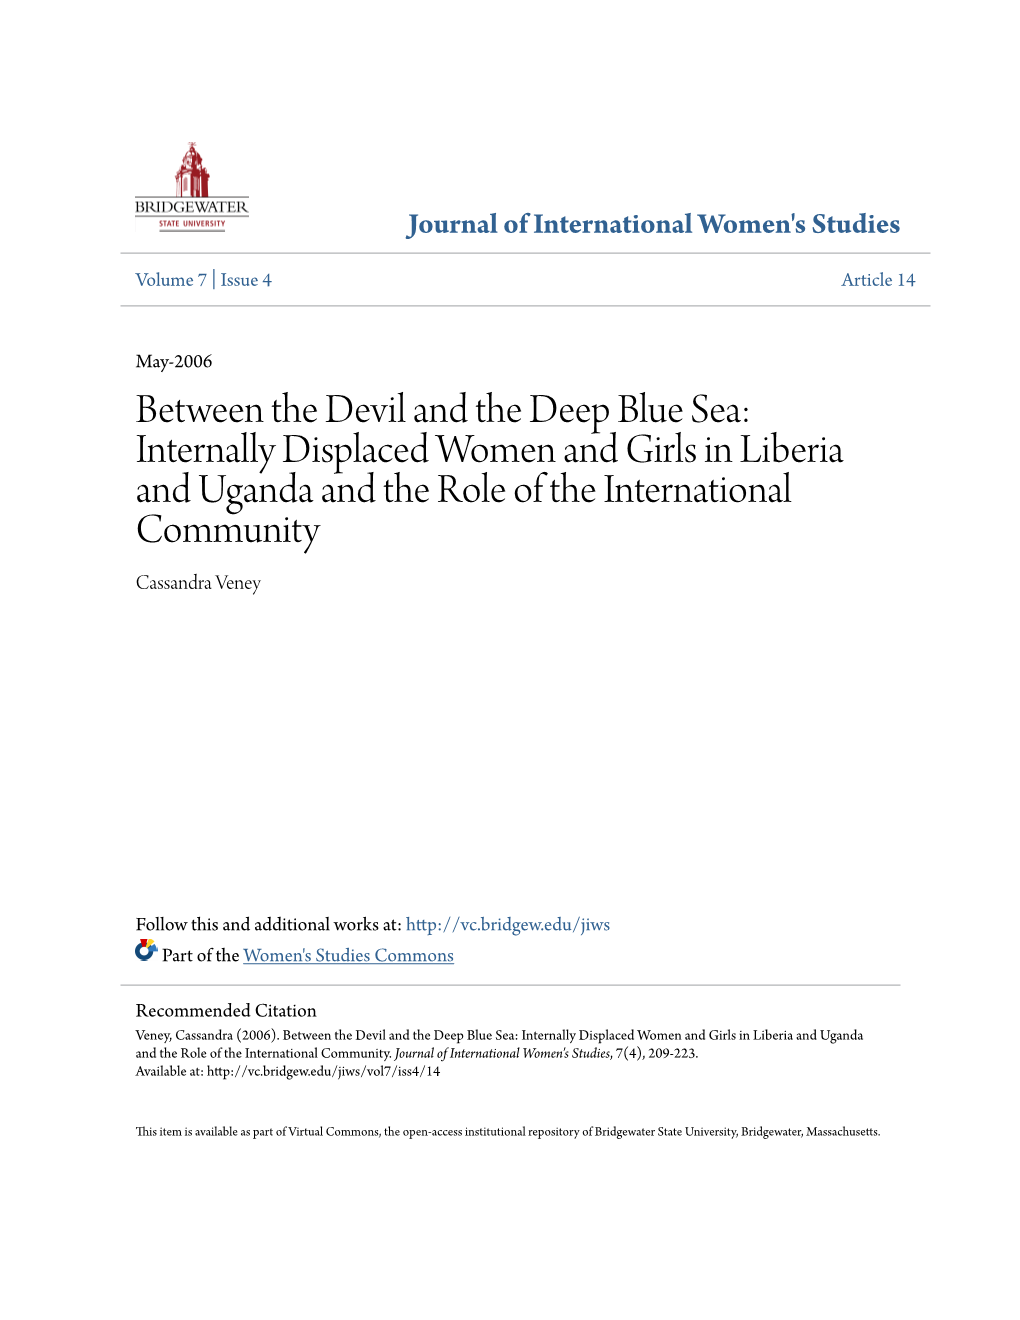 Between the Devil and the Deep Blue Sea: Internally Displaced Women and Girls in Liberia and Uganda and the Role of the International Community Cassandra Veney